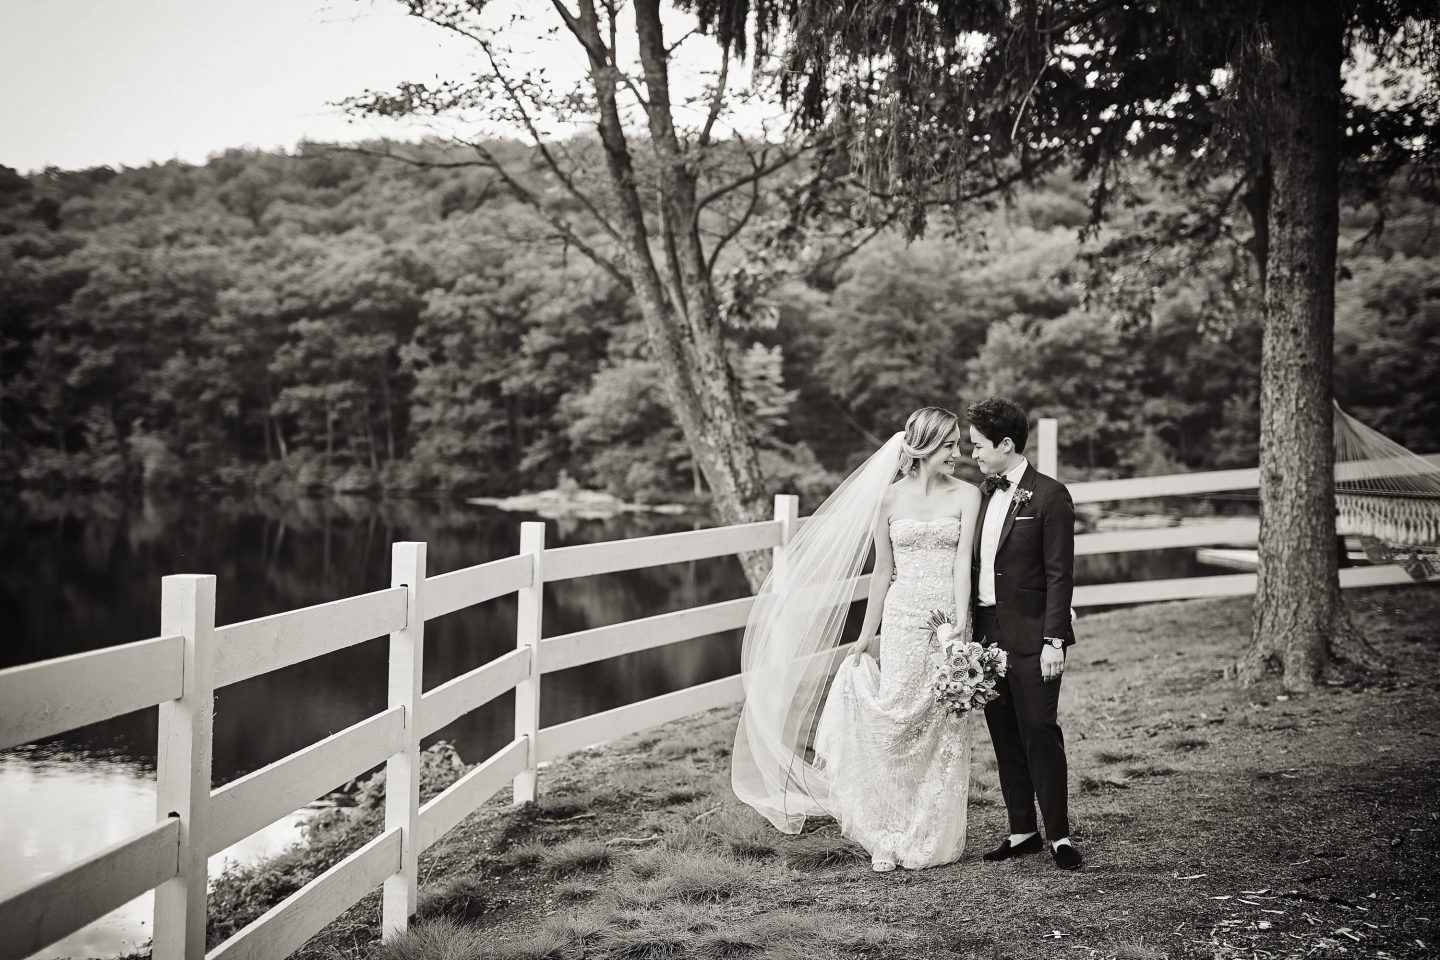 Brides at this camp-themed wedding weekend at Cedar Lakes Estate in Upstate NY, USA | Photo by Christian Oth Studios